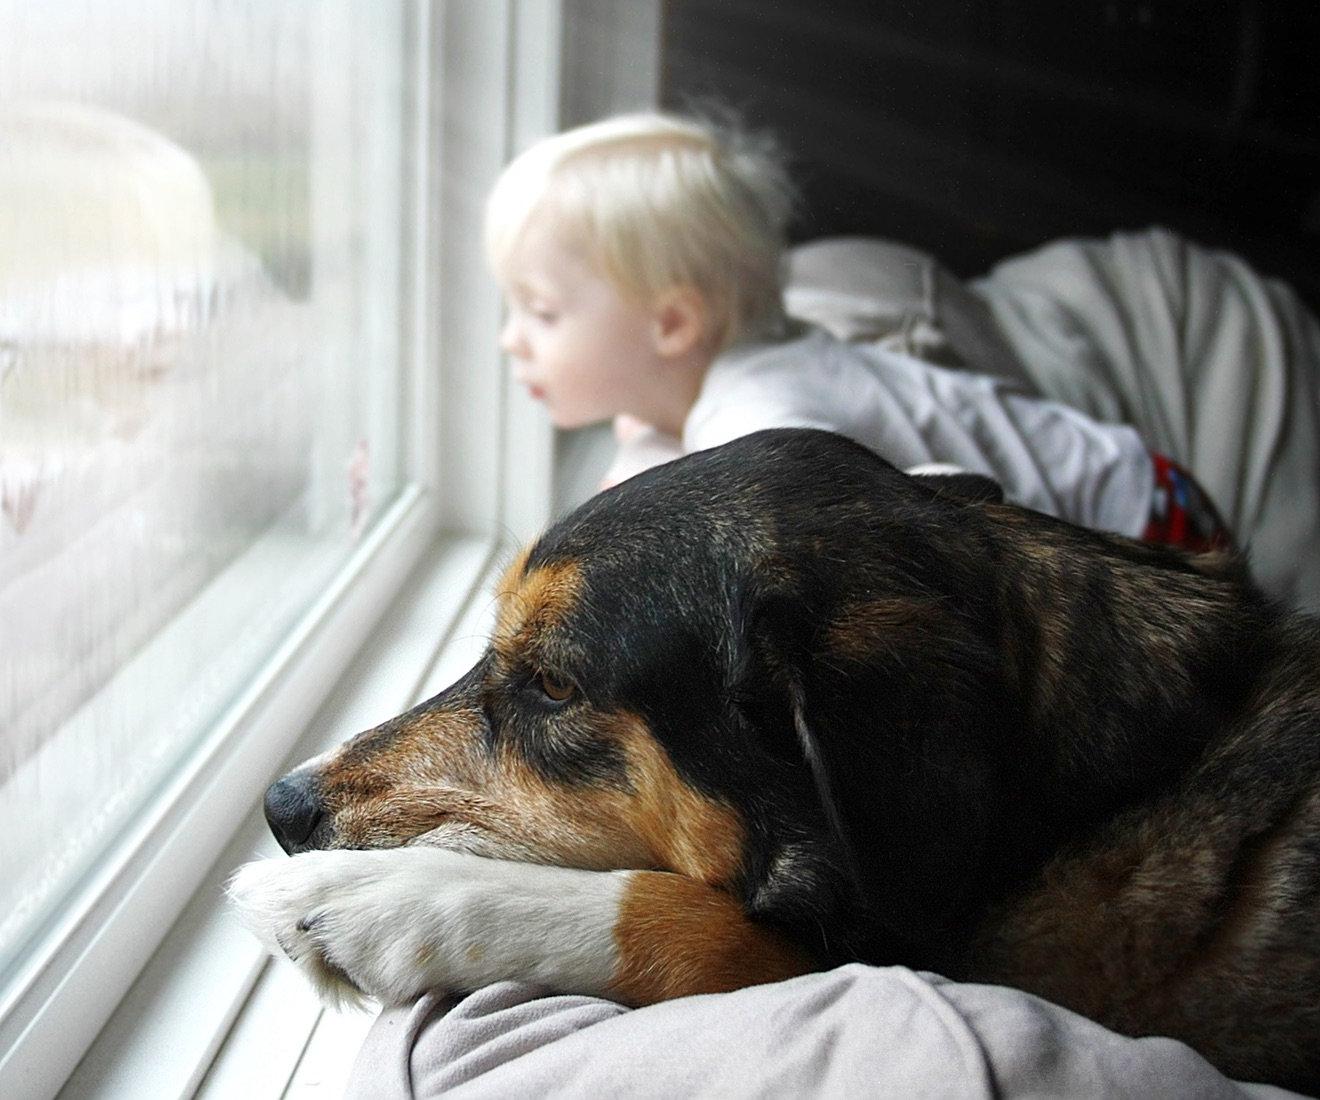 Toddler and dog looking out a window.